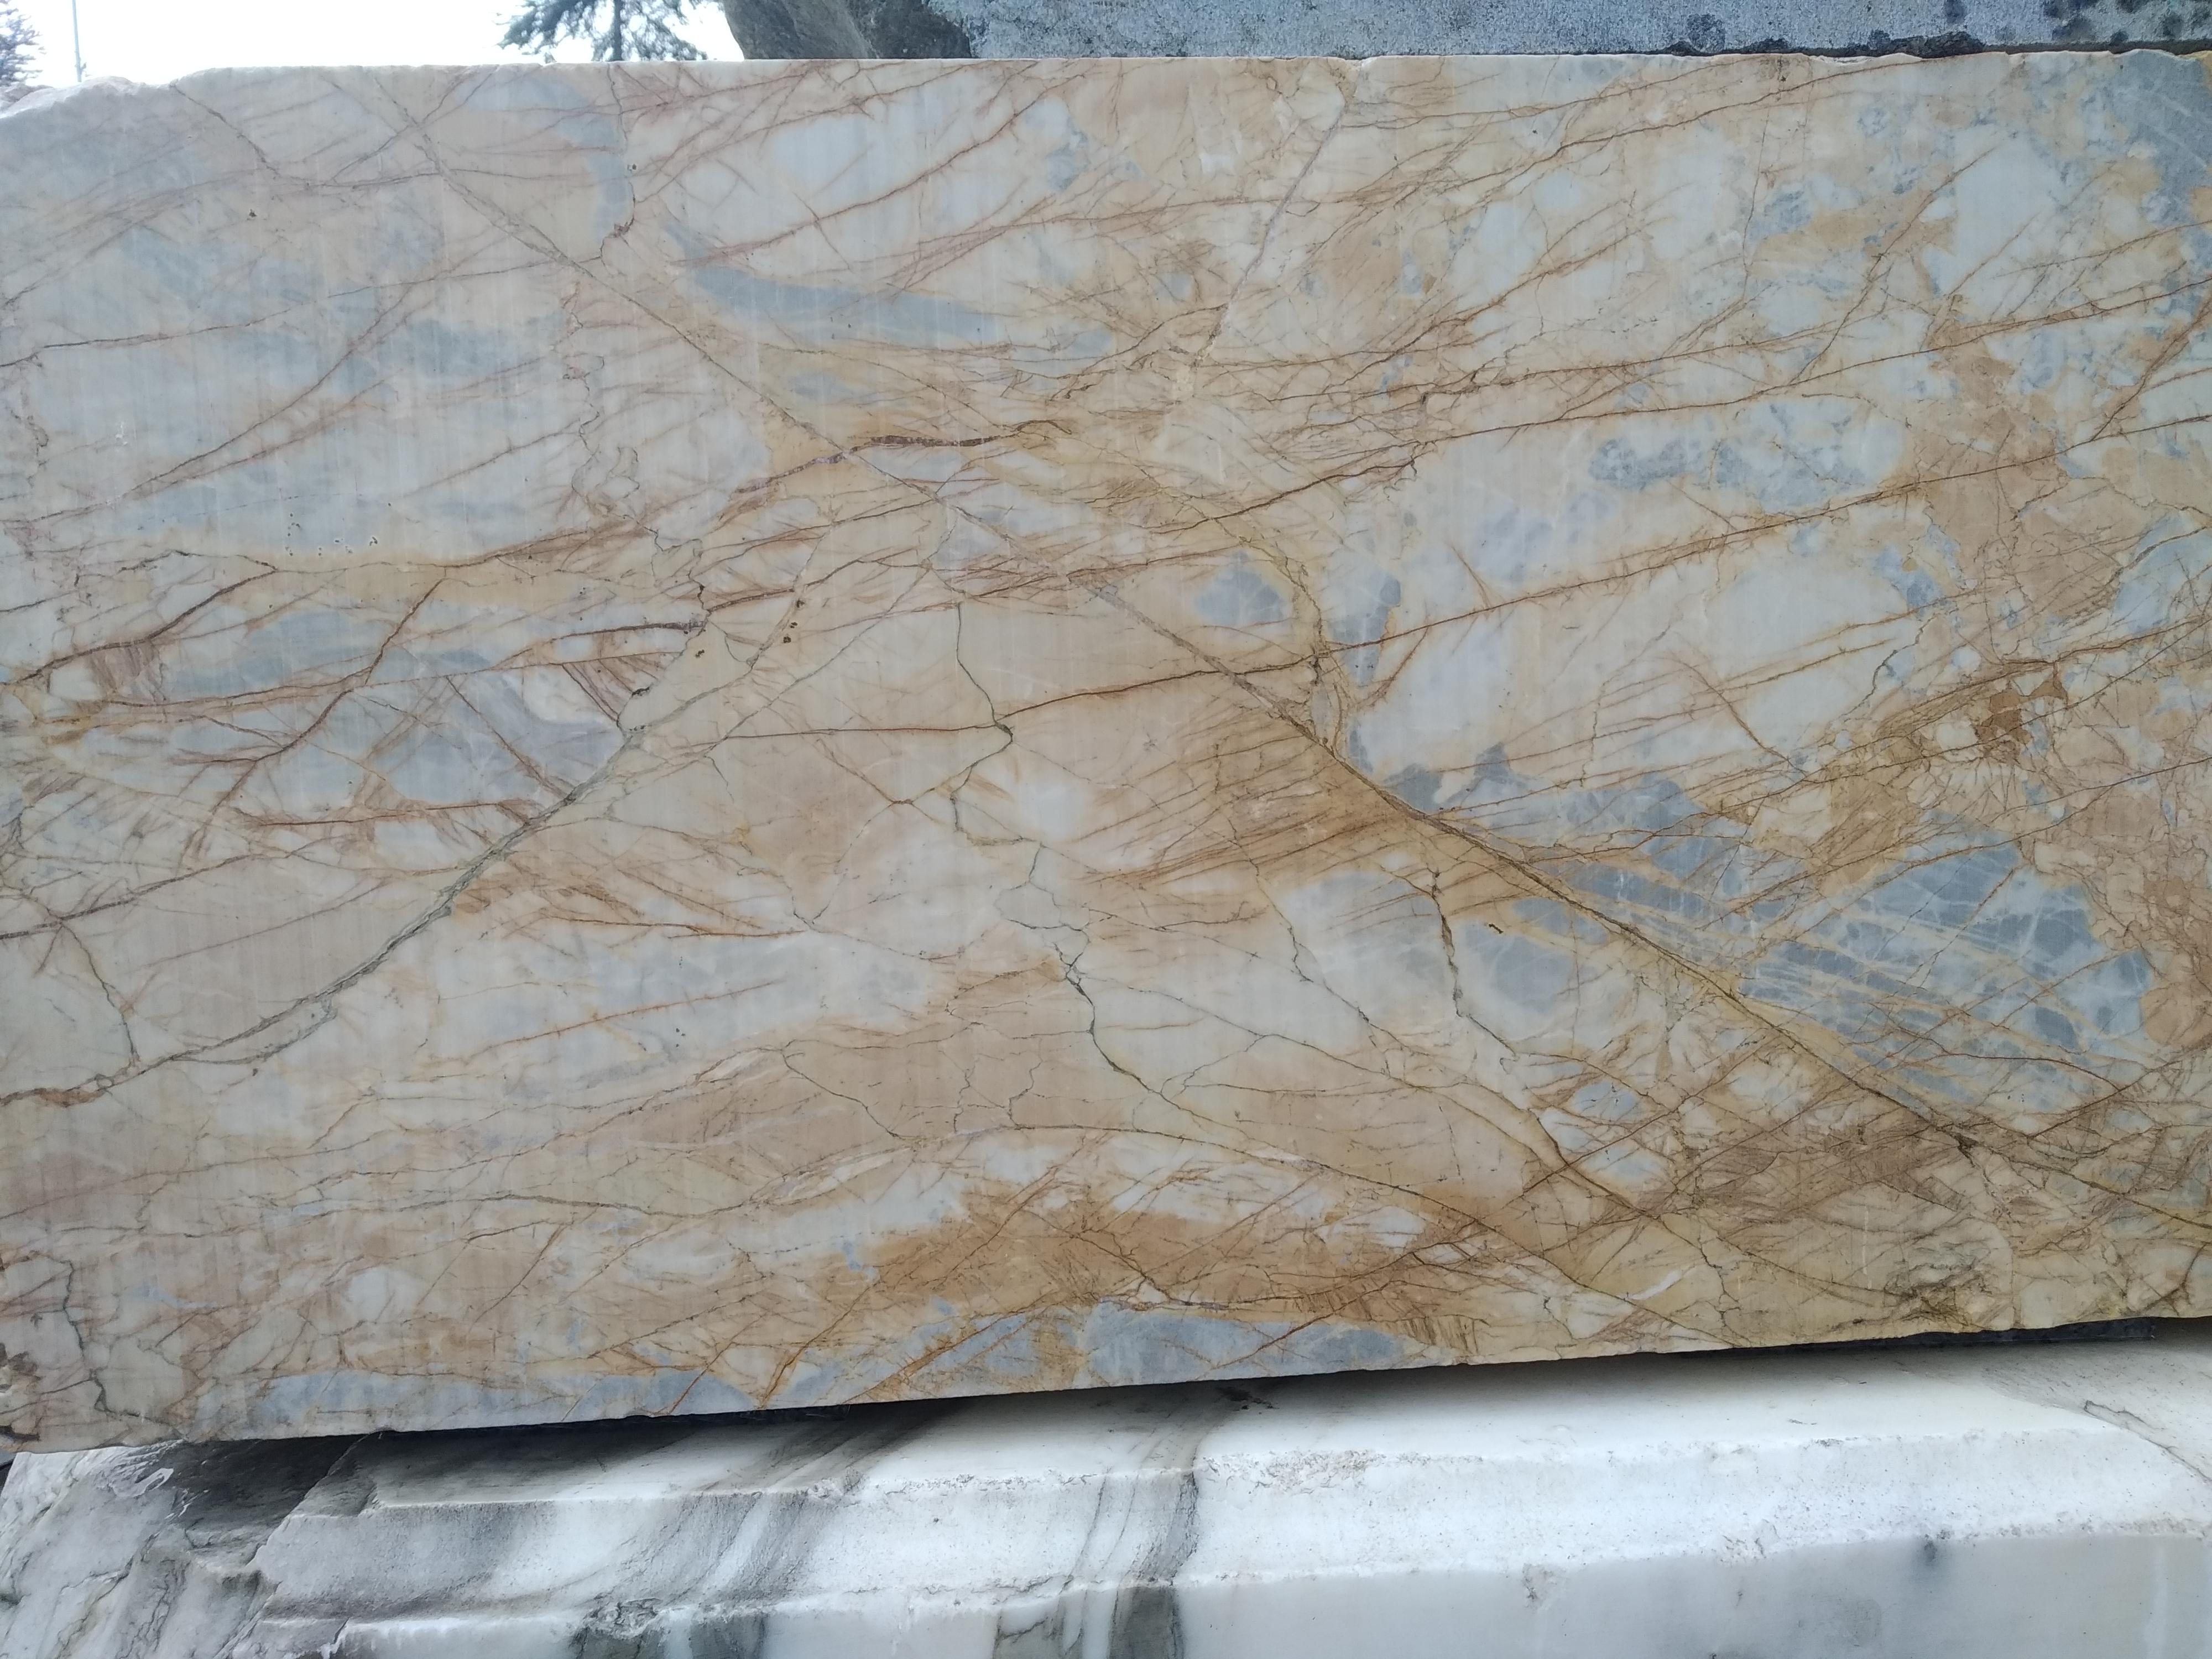 Marble Travertine Limestone Tops
Cut to your requirements from the Carrara mines direct
We can color match for your projects
Also see our other marble sink products.

